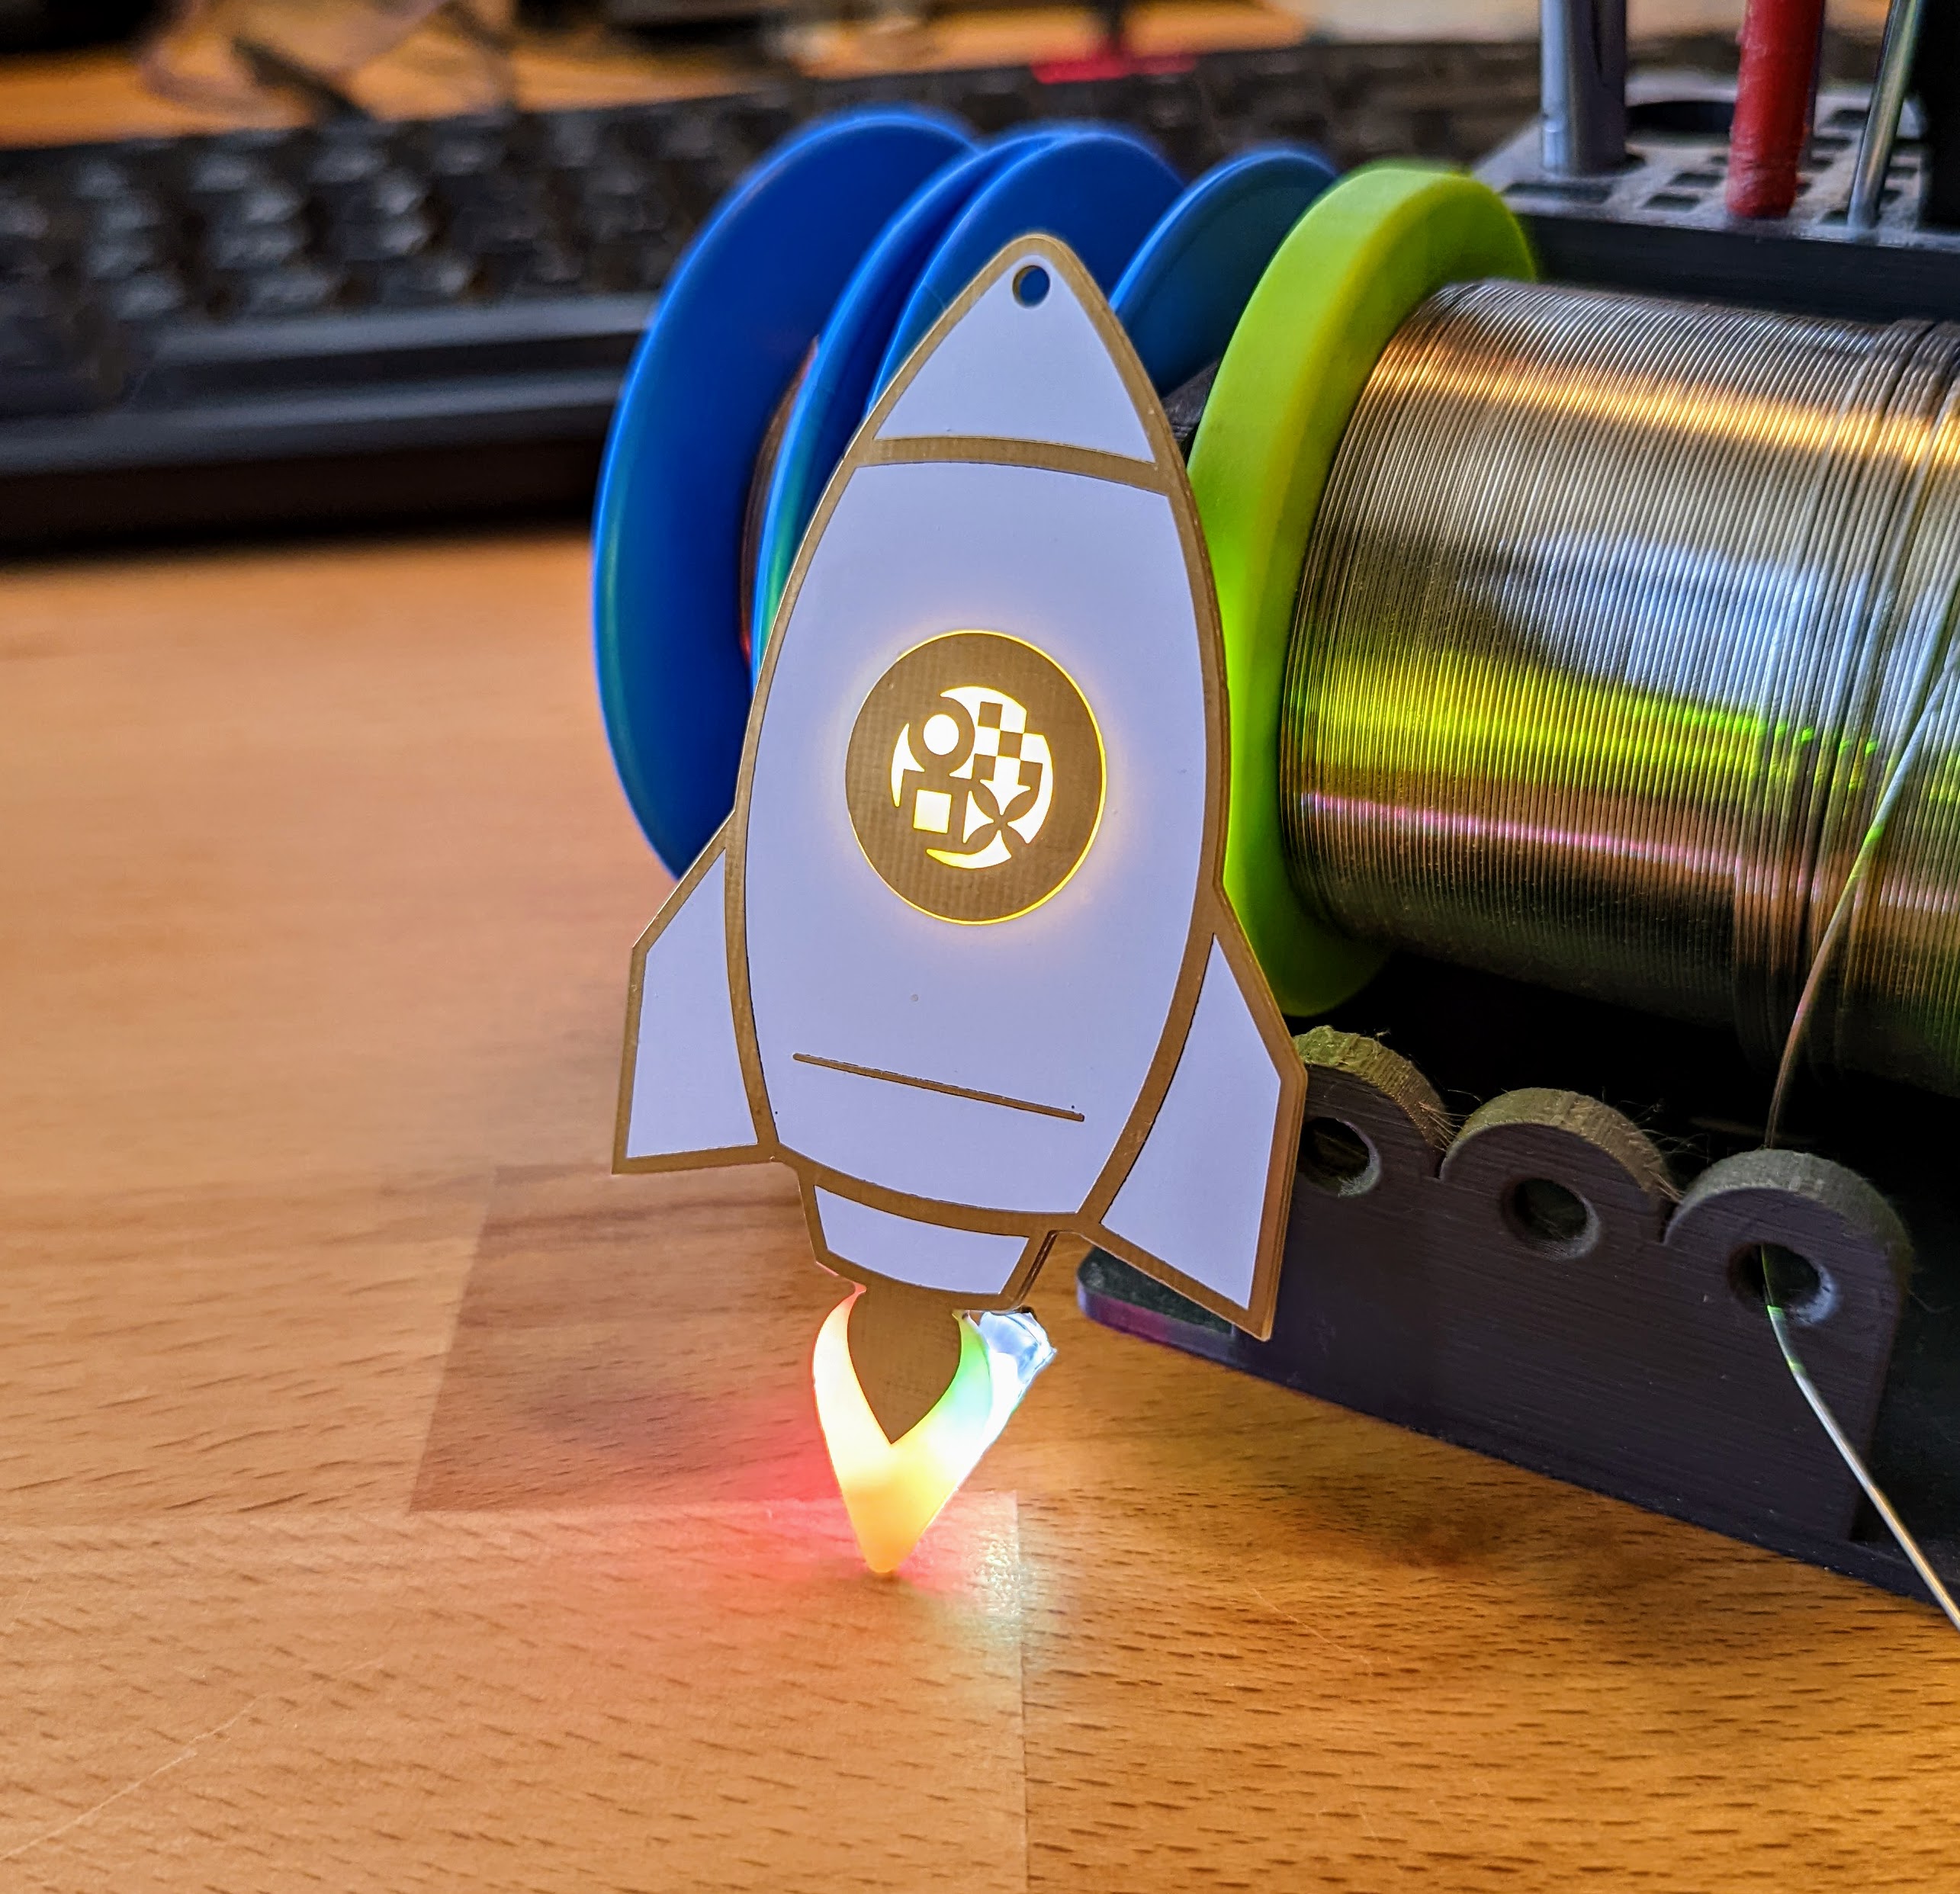 Rainbow Rocket - A soldering kit out of this world